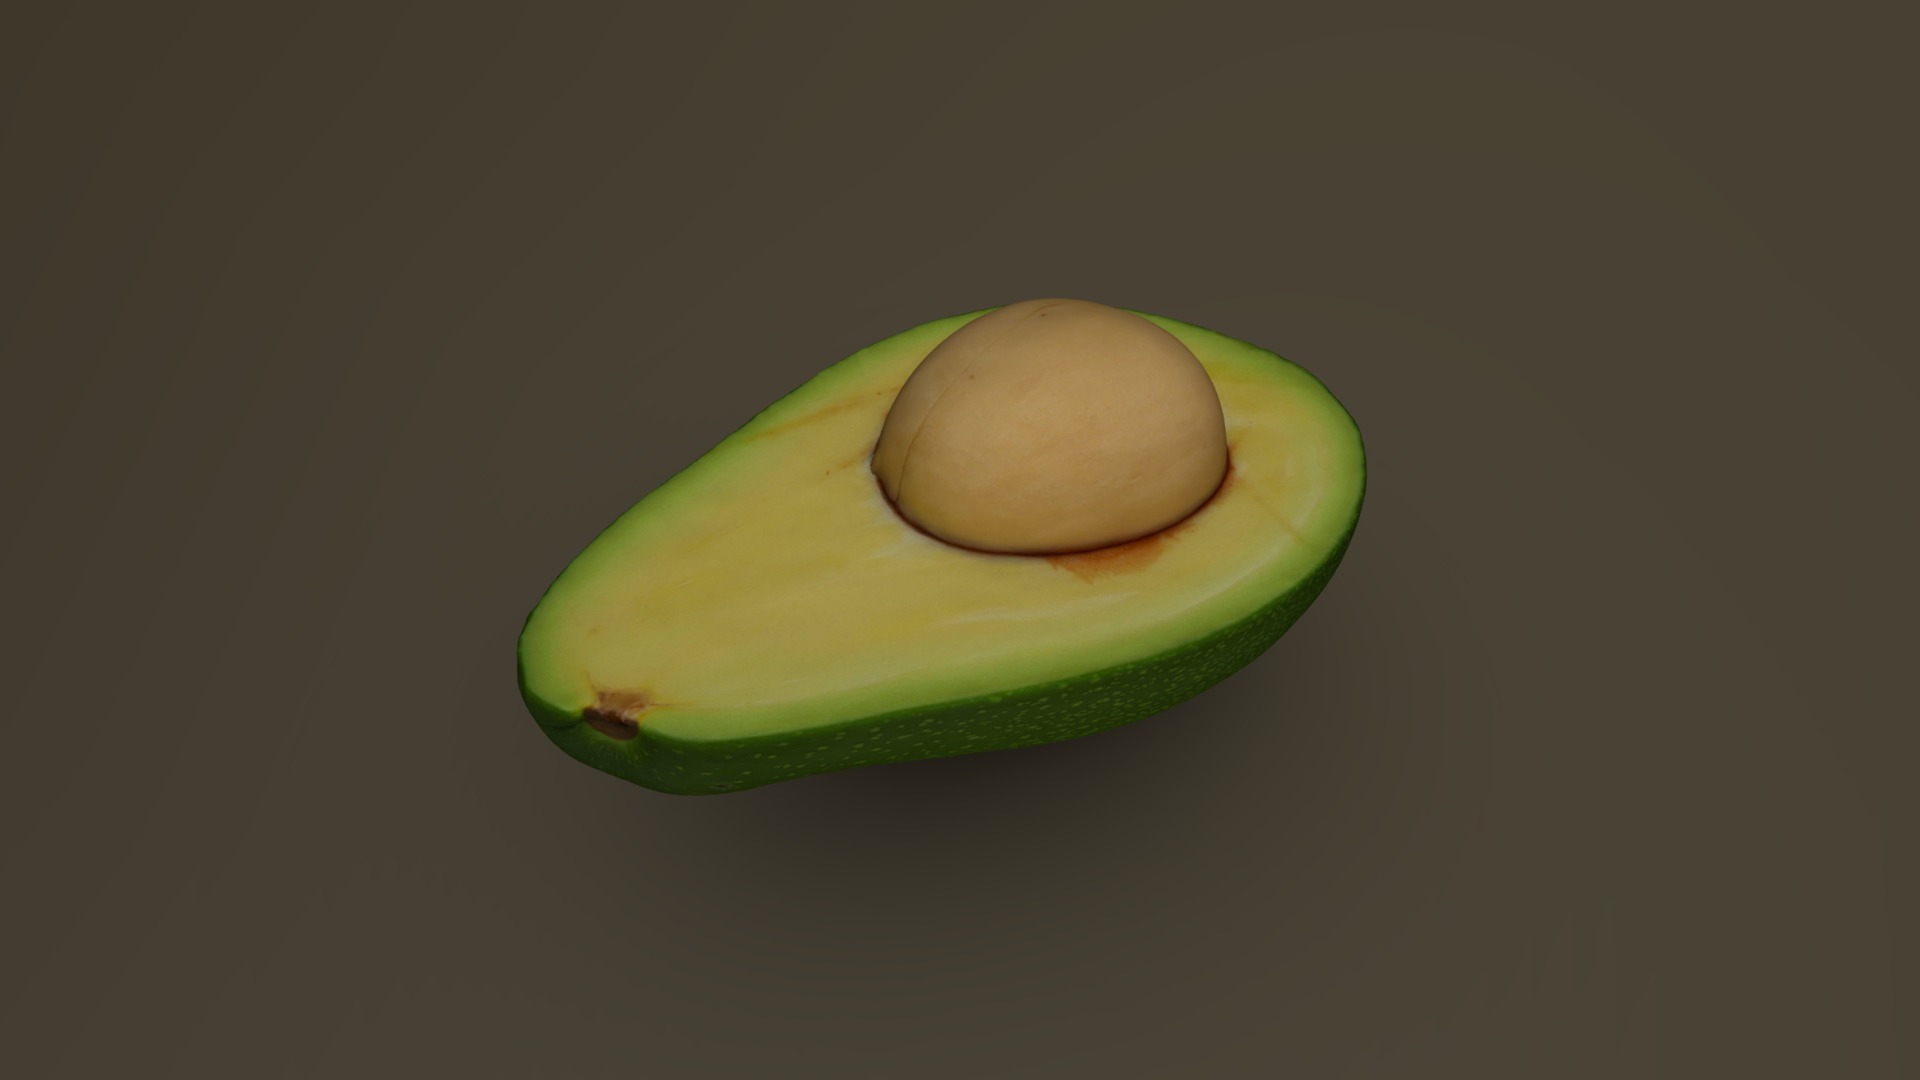 3D model Half Green Avocado with the Pit 09 - This is a 3D model of the Half Green Avocado with the Pit 09. The 3D model is about a green avocado on a green plate.